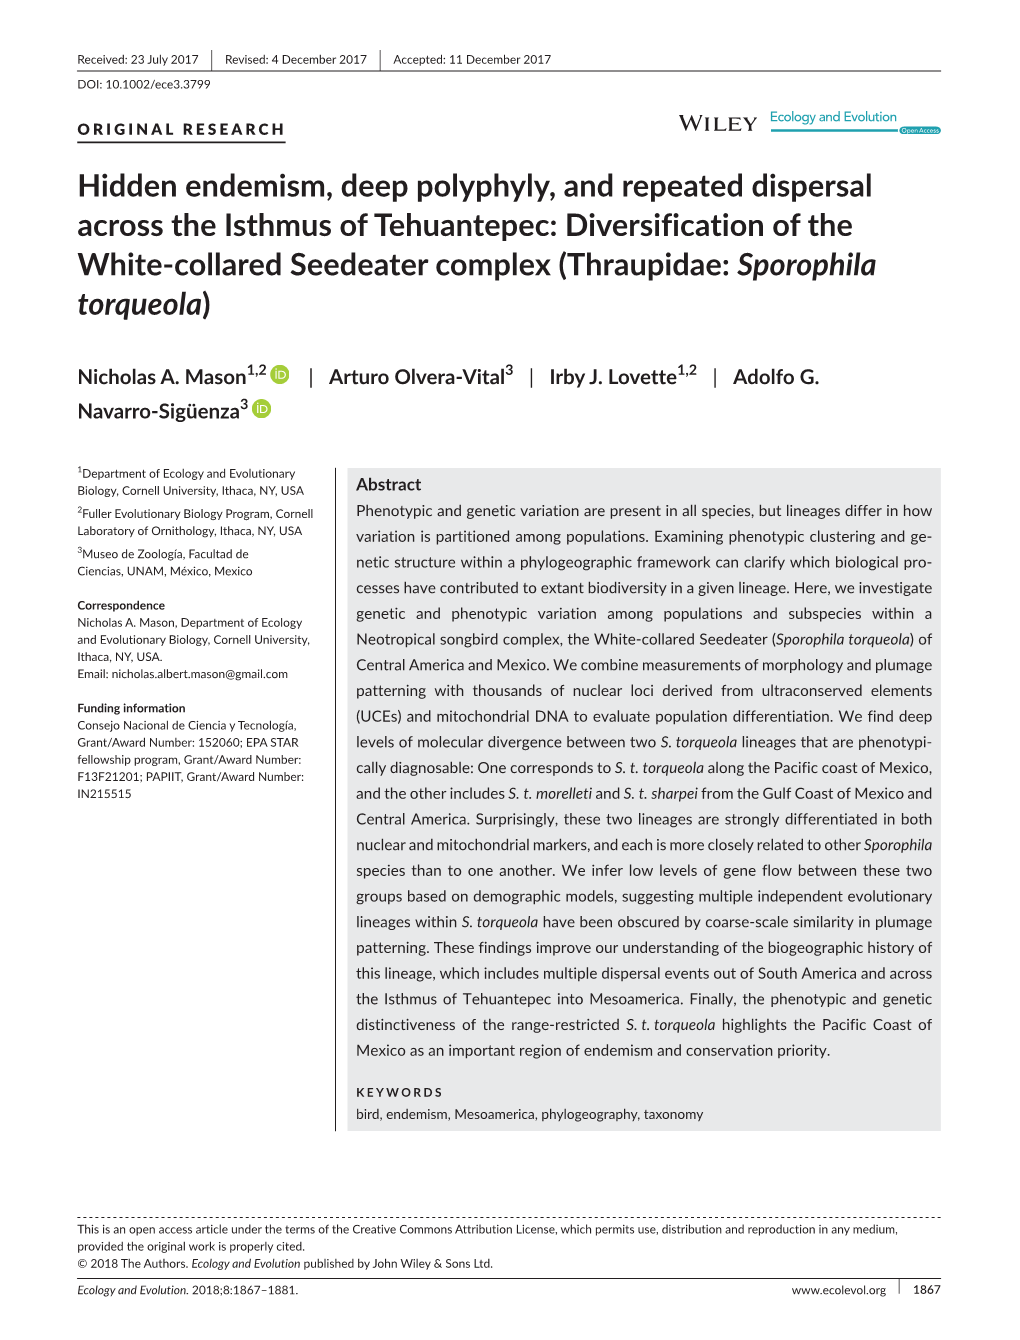 Hidden Endemism, Deep Polyphyly, and Repeated Dispersal